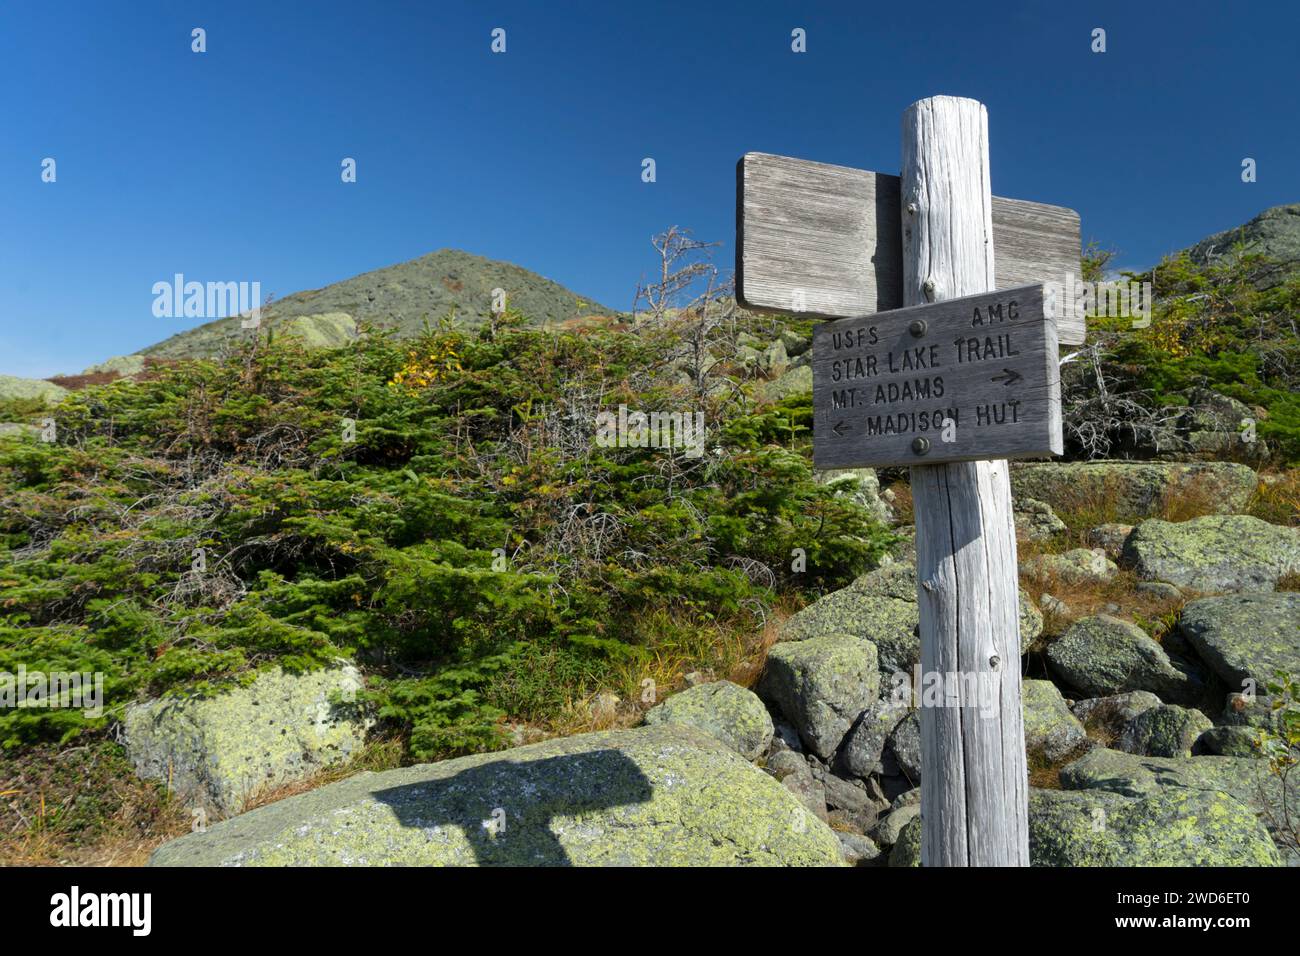 Weathered wooden trail sign on the Star Lake Trail, New Hampshire, USA. The summit of Mount Madison can be seen in the background. Stock Photo